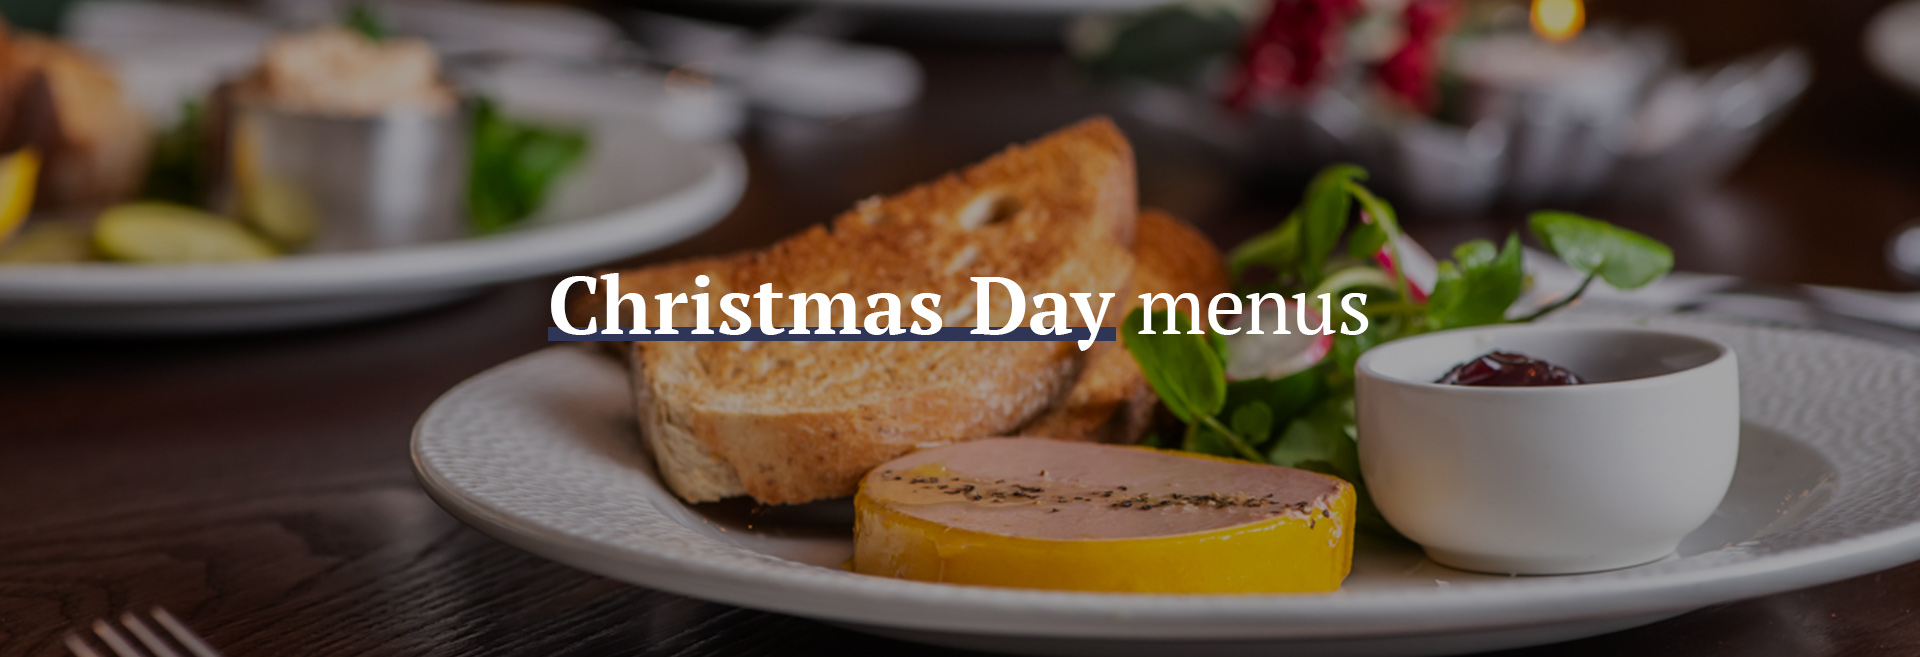 Christmas Day Menu at The Drapers Arms